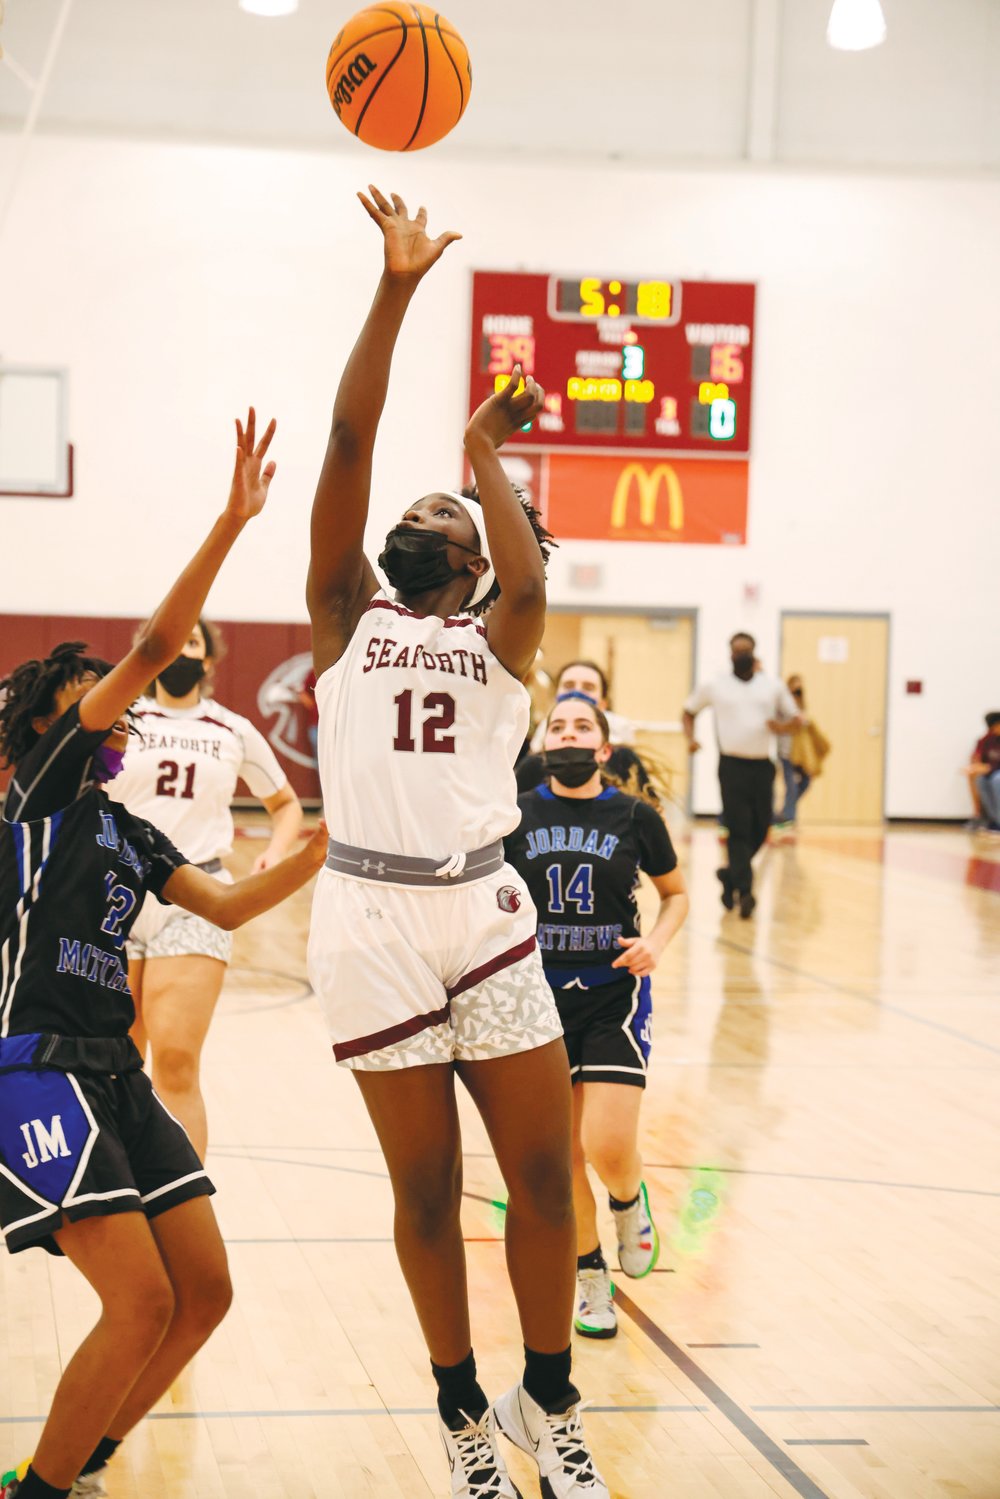 Seaforth sophomore Hannah Ajayi (12) goes up for a layup in the Hawks' 71-28 blowout win over the Jordan-Matthews Jets last Friday in Pittsboro. Ajayi, the team's leading scorer with 20 points, thrived in the team's transition game against J-M.